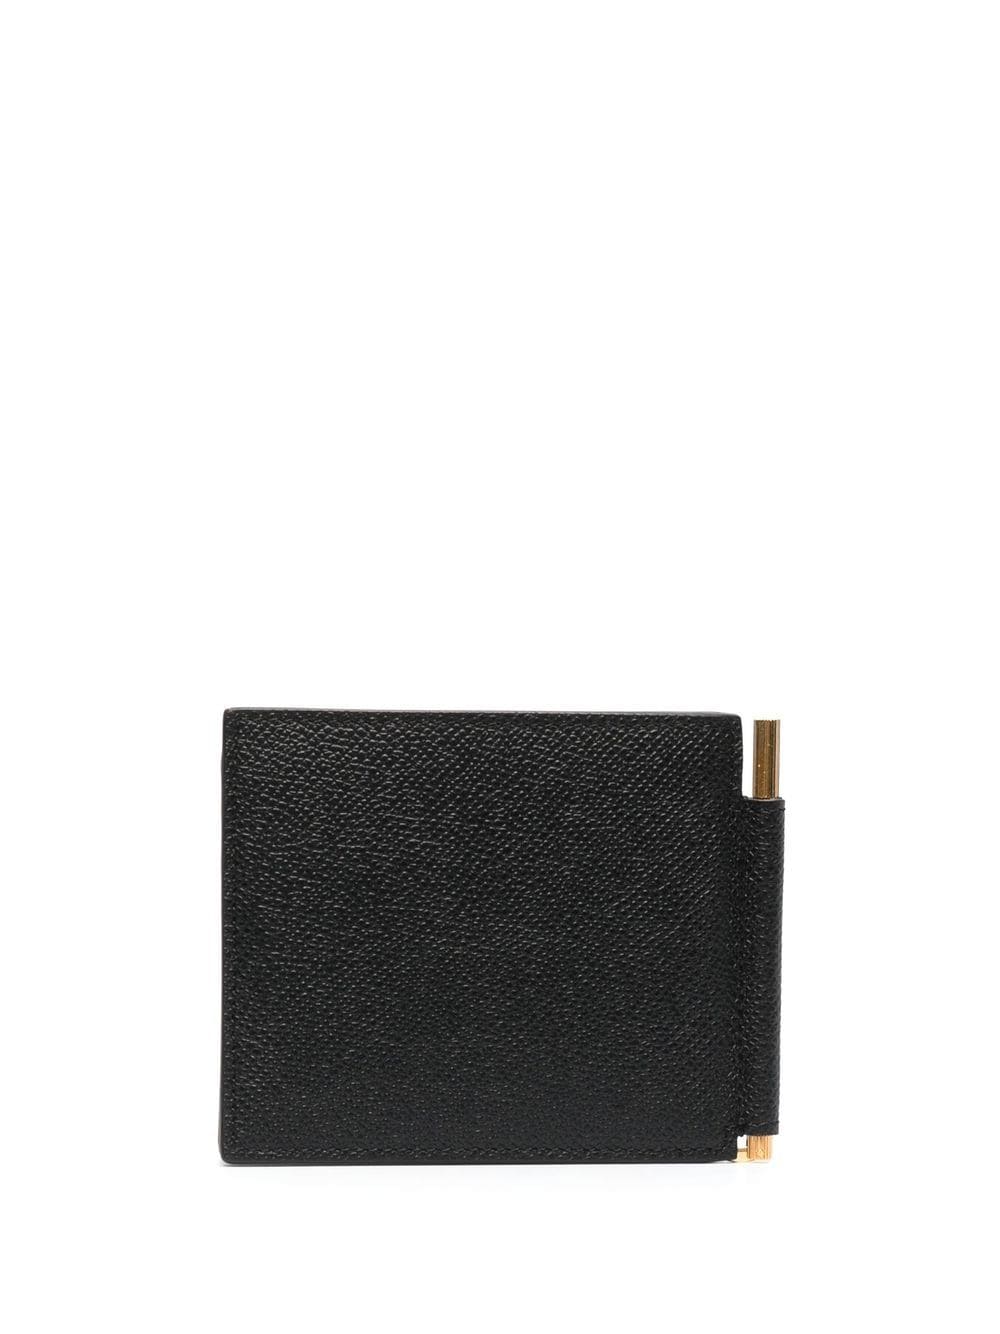 hinged leather bifold wallet